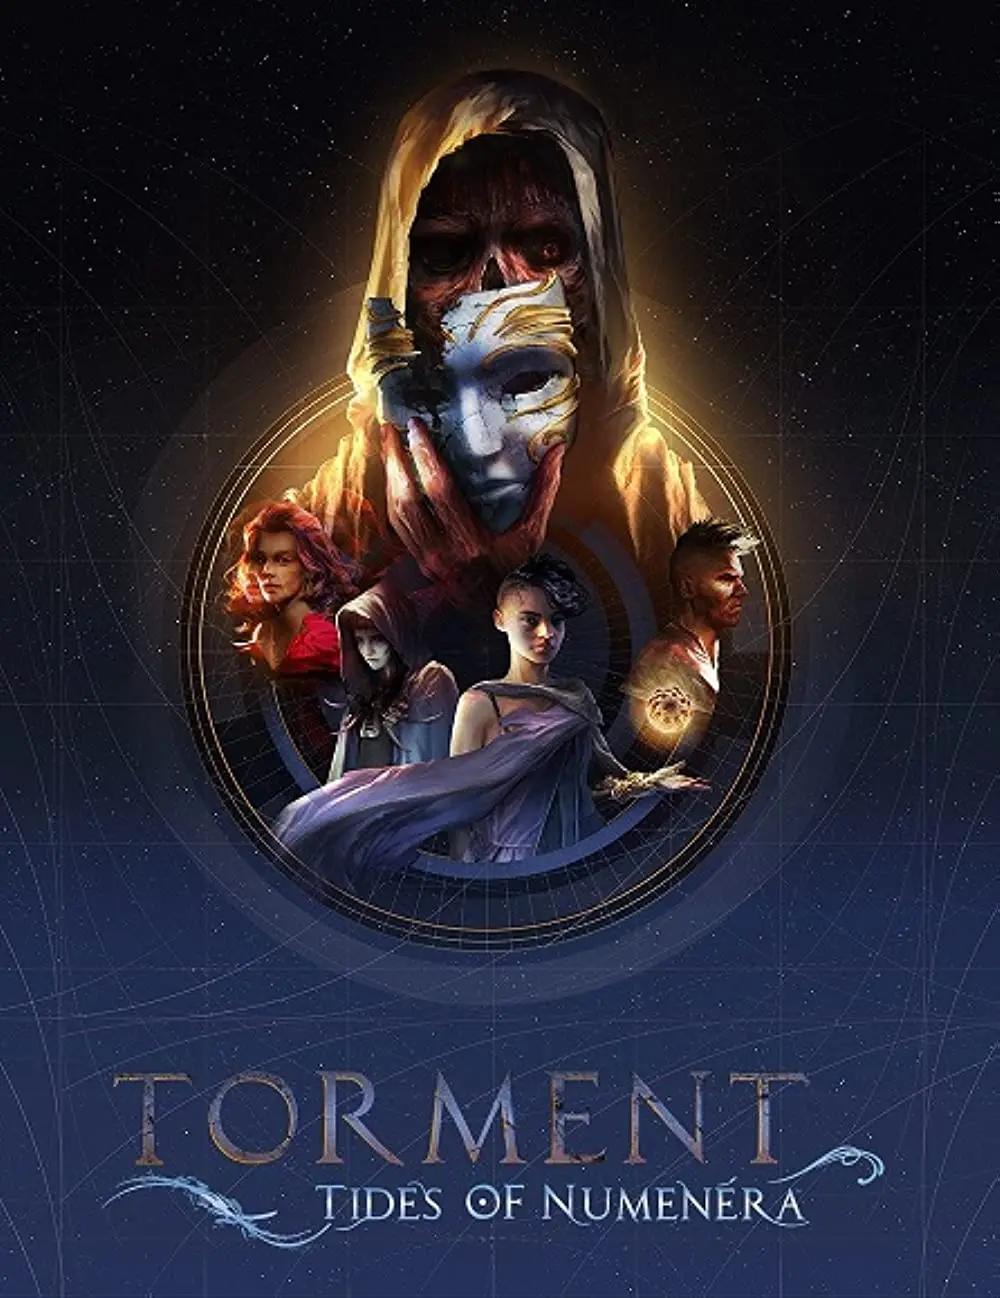 Torment Tides of Numenera Day One Edition (PC / Mac / Linux) - Steam - Digital Code